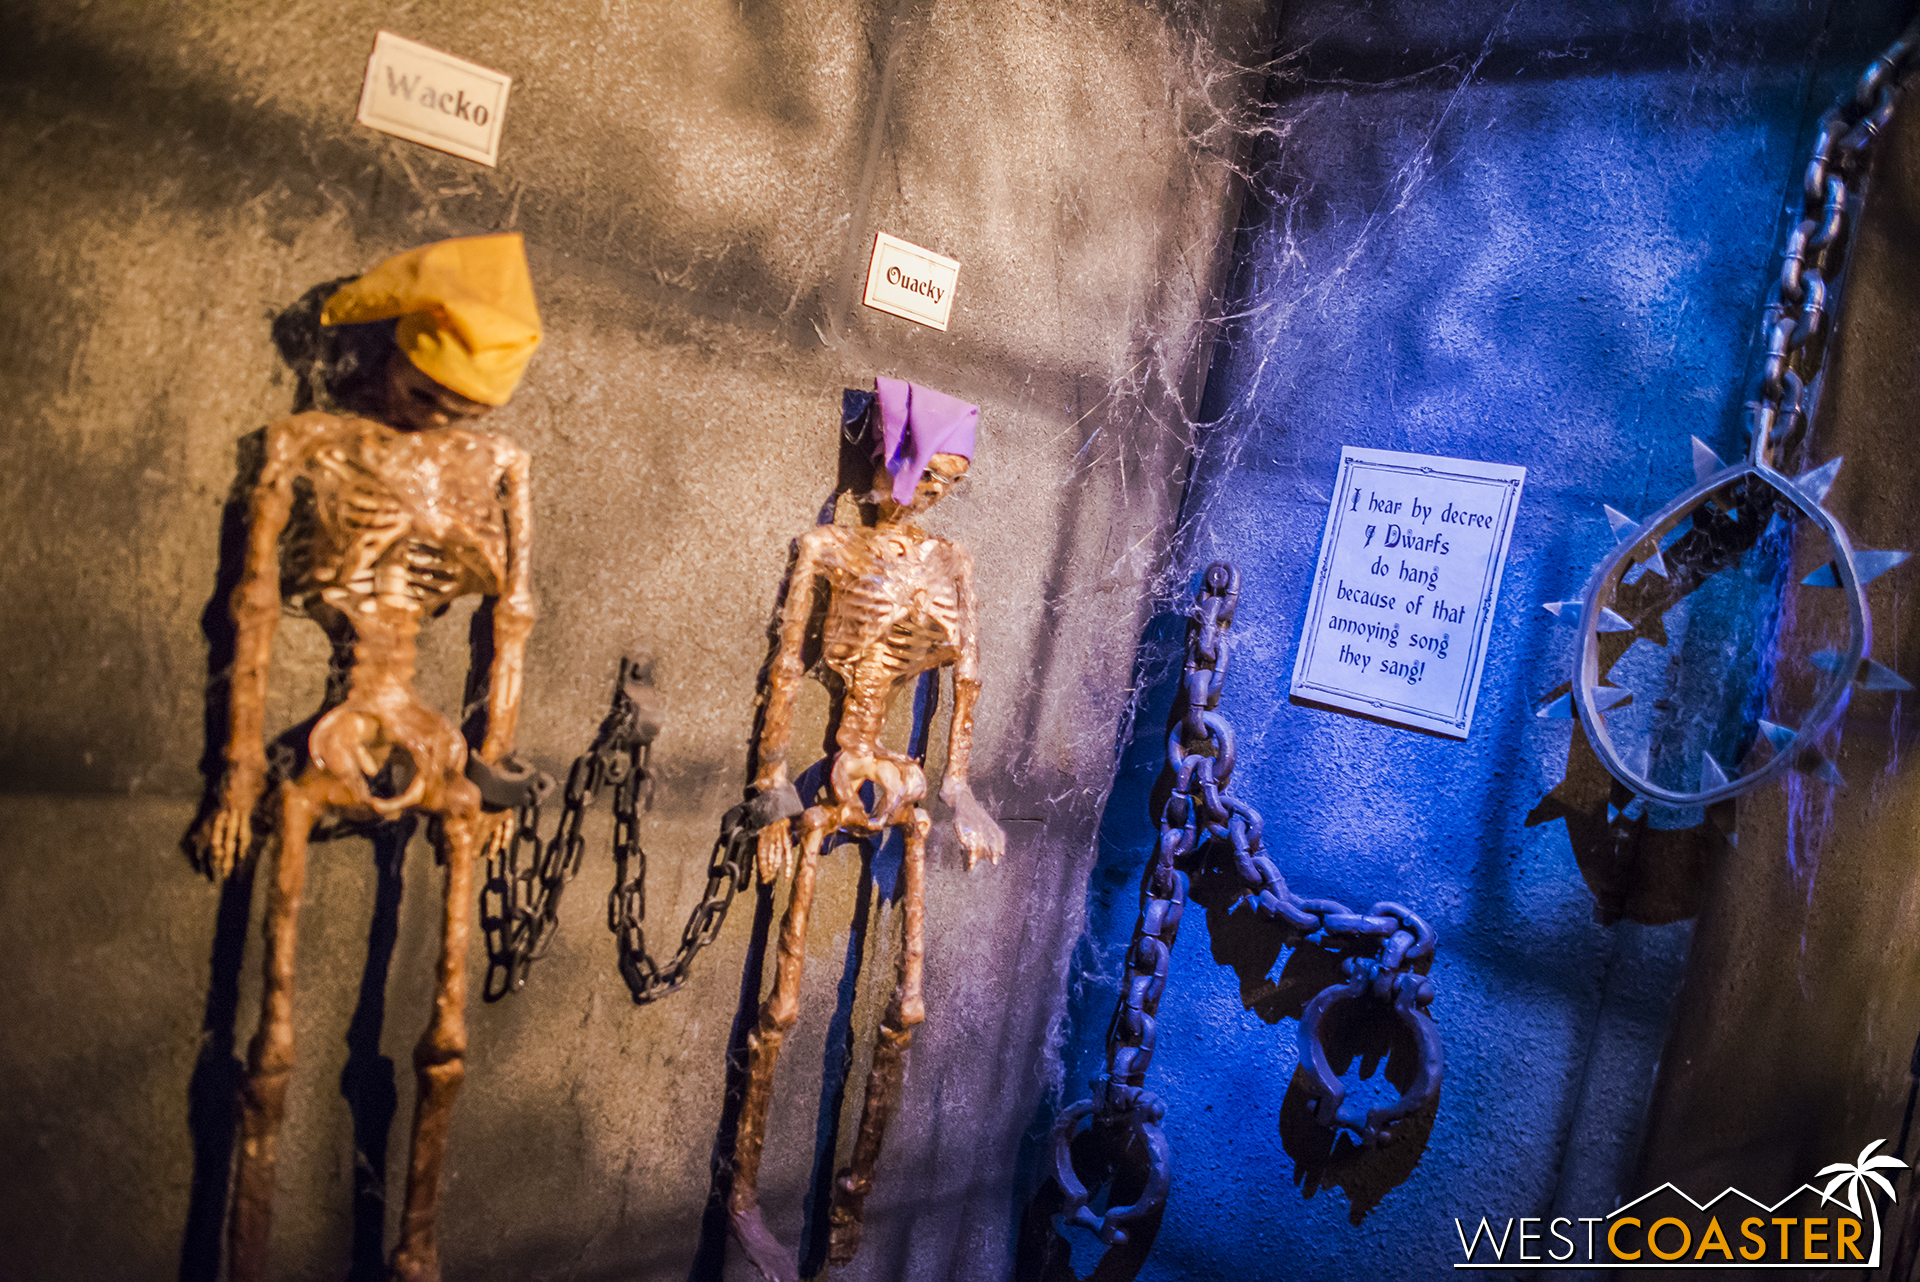  After a false dead end, guests are led into a chamber themed to Snow White and the Seven Dwarves. 